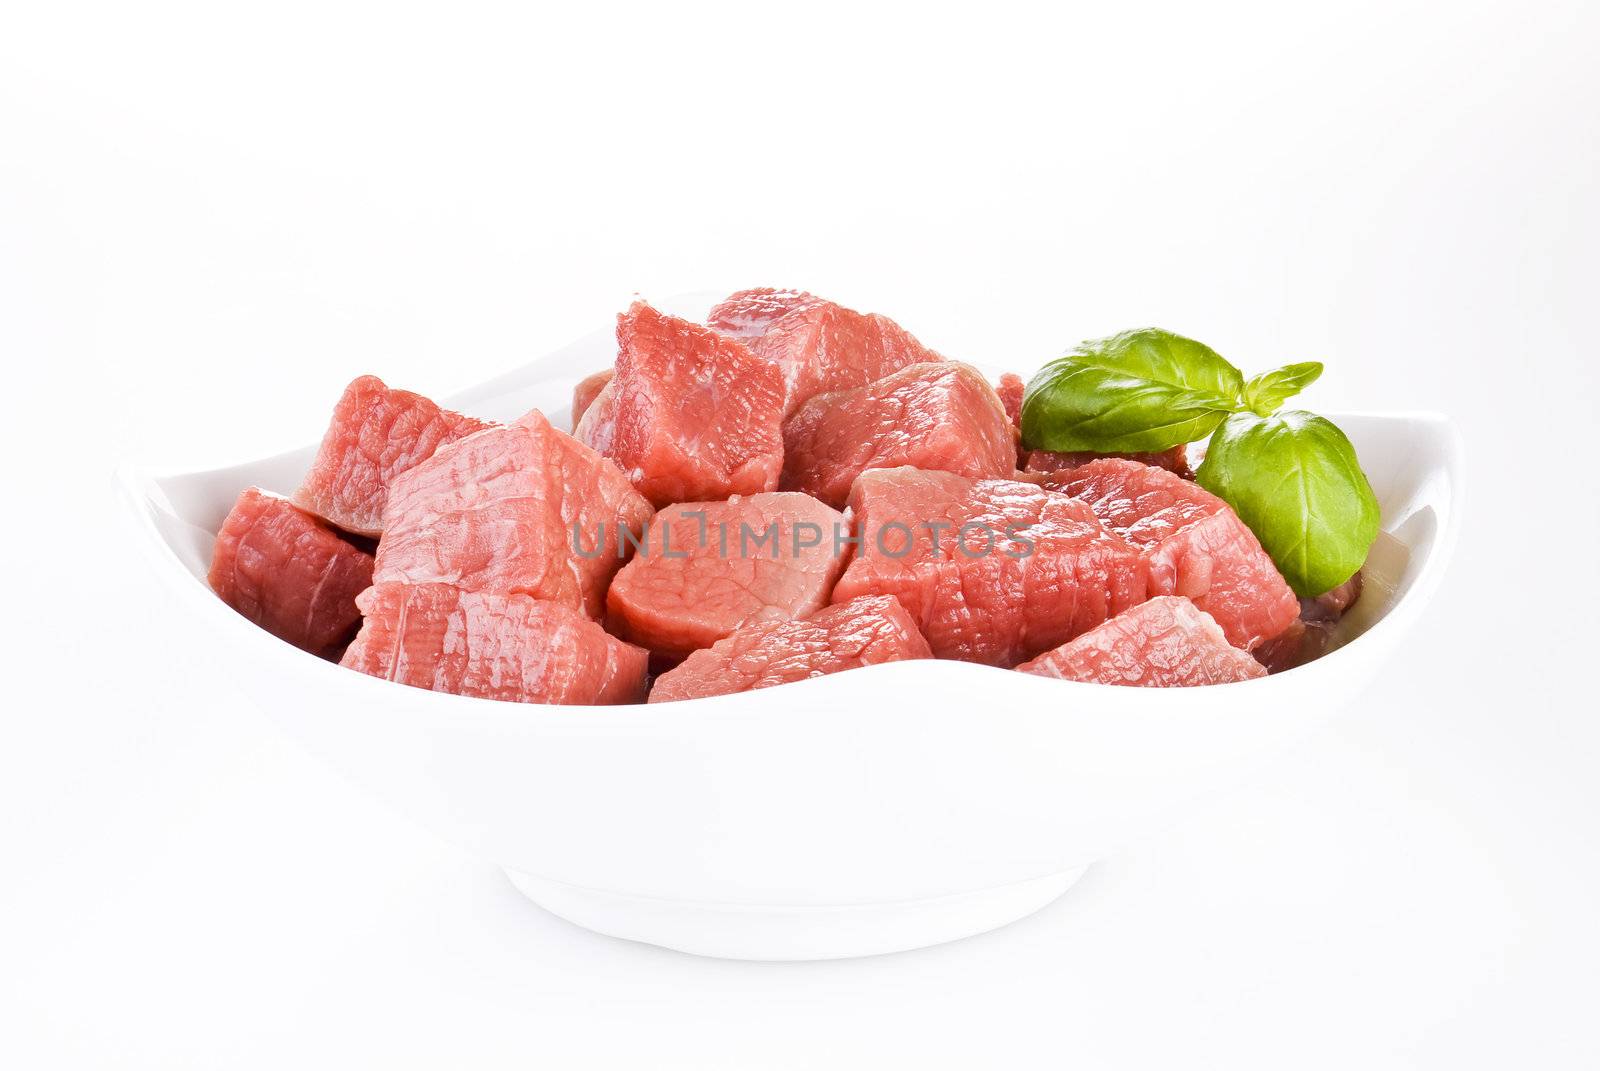 Bowl of diced beef over white background